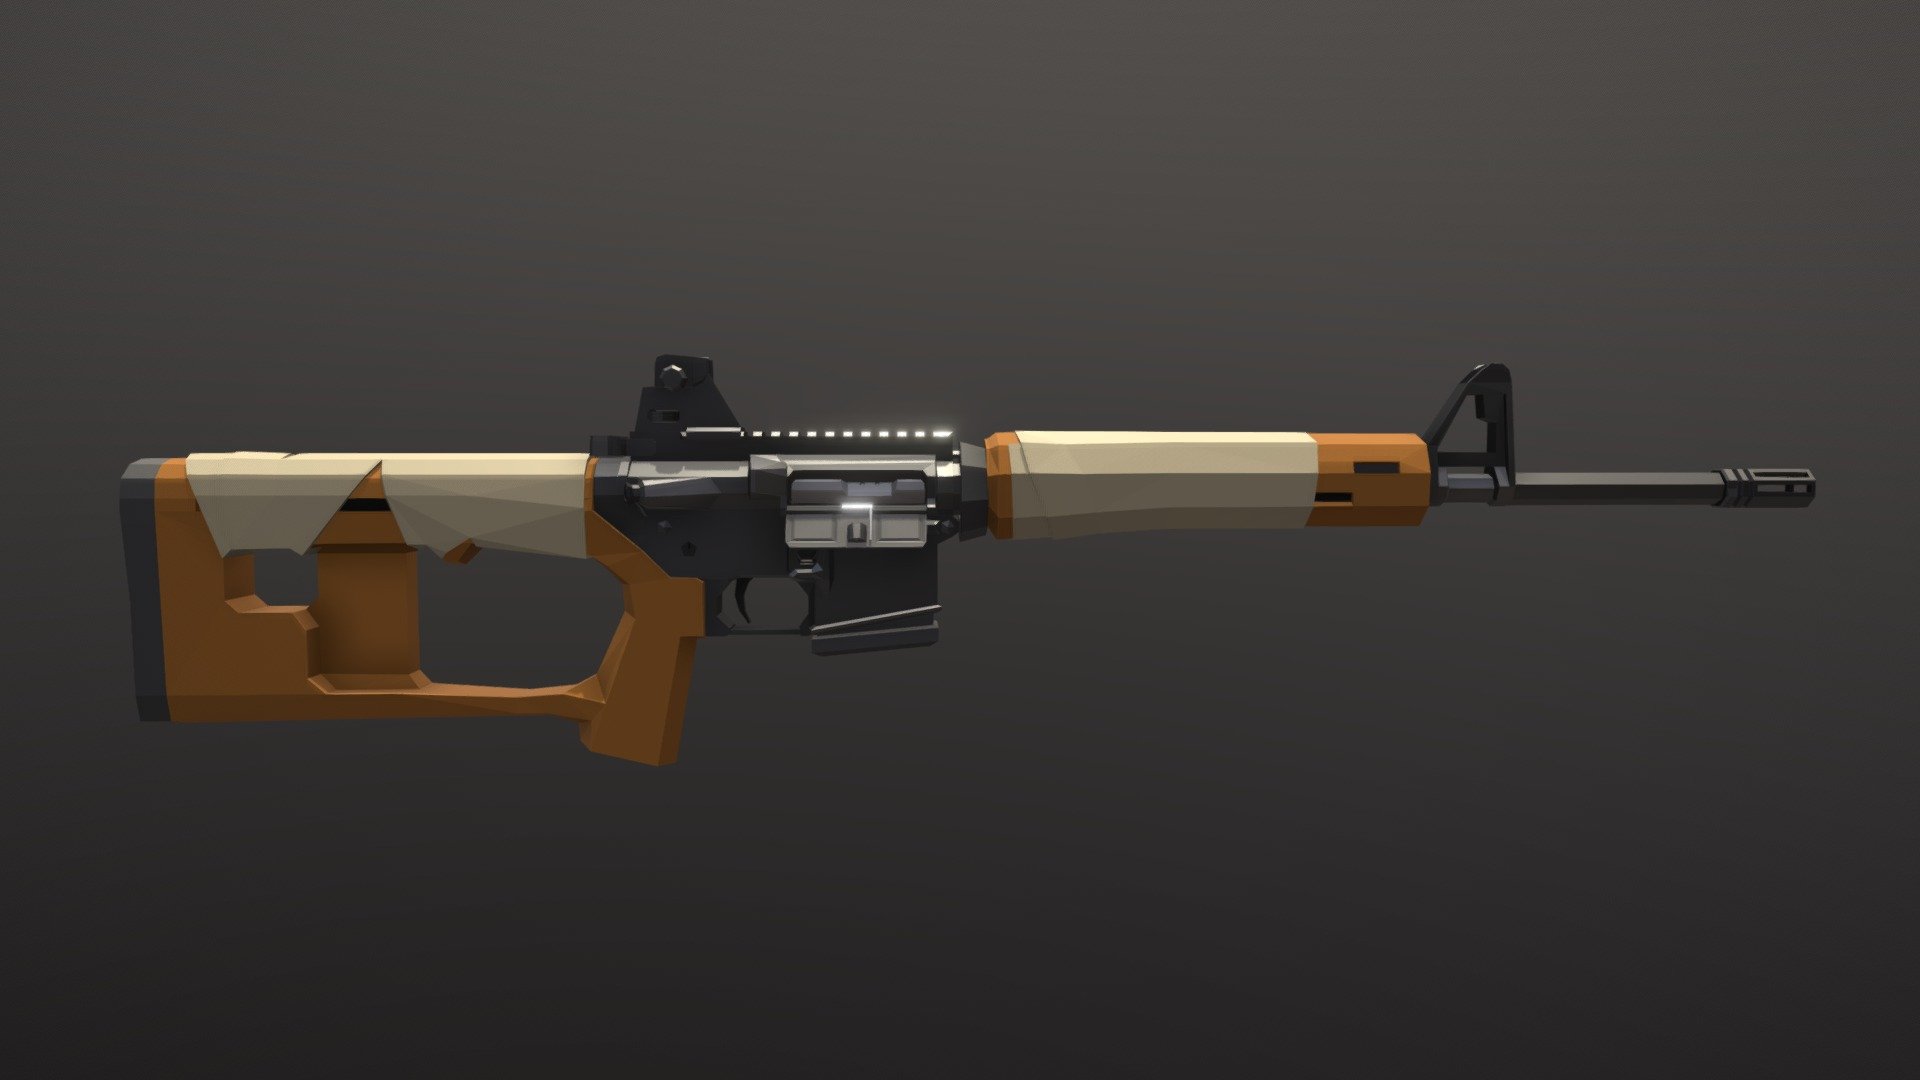 Low-Poly model of ADAR 2-15, russian semi automatic clone of AR-15 with SVD inspired furniture. I also added some cloth wrapped around stock and handguard cuz it looks cool 3d model